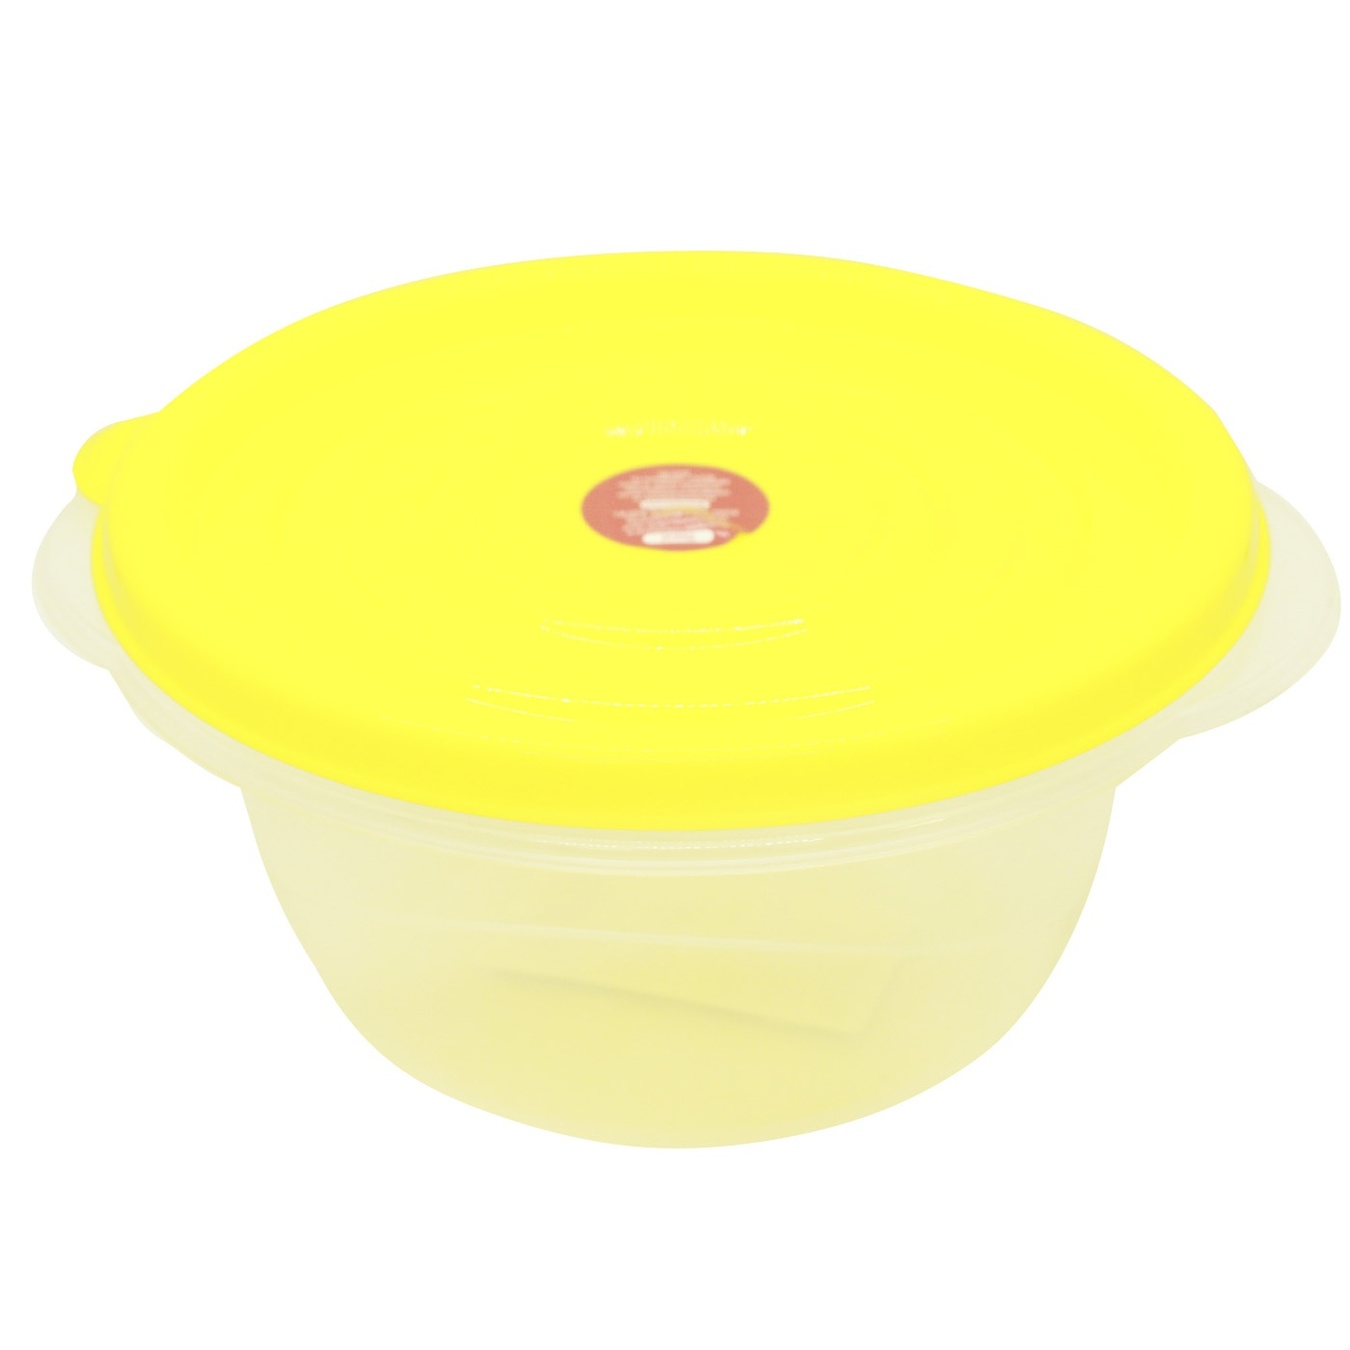 Aleana container for food storage Omega round transparent/dark yellow 0.75 l